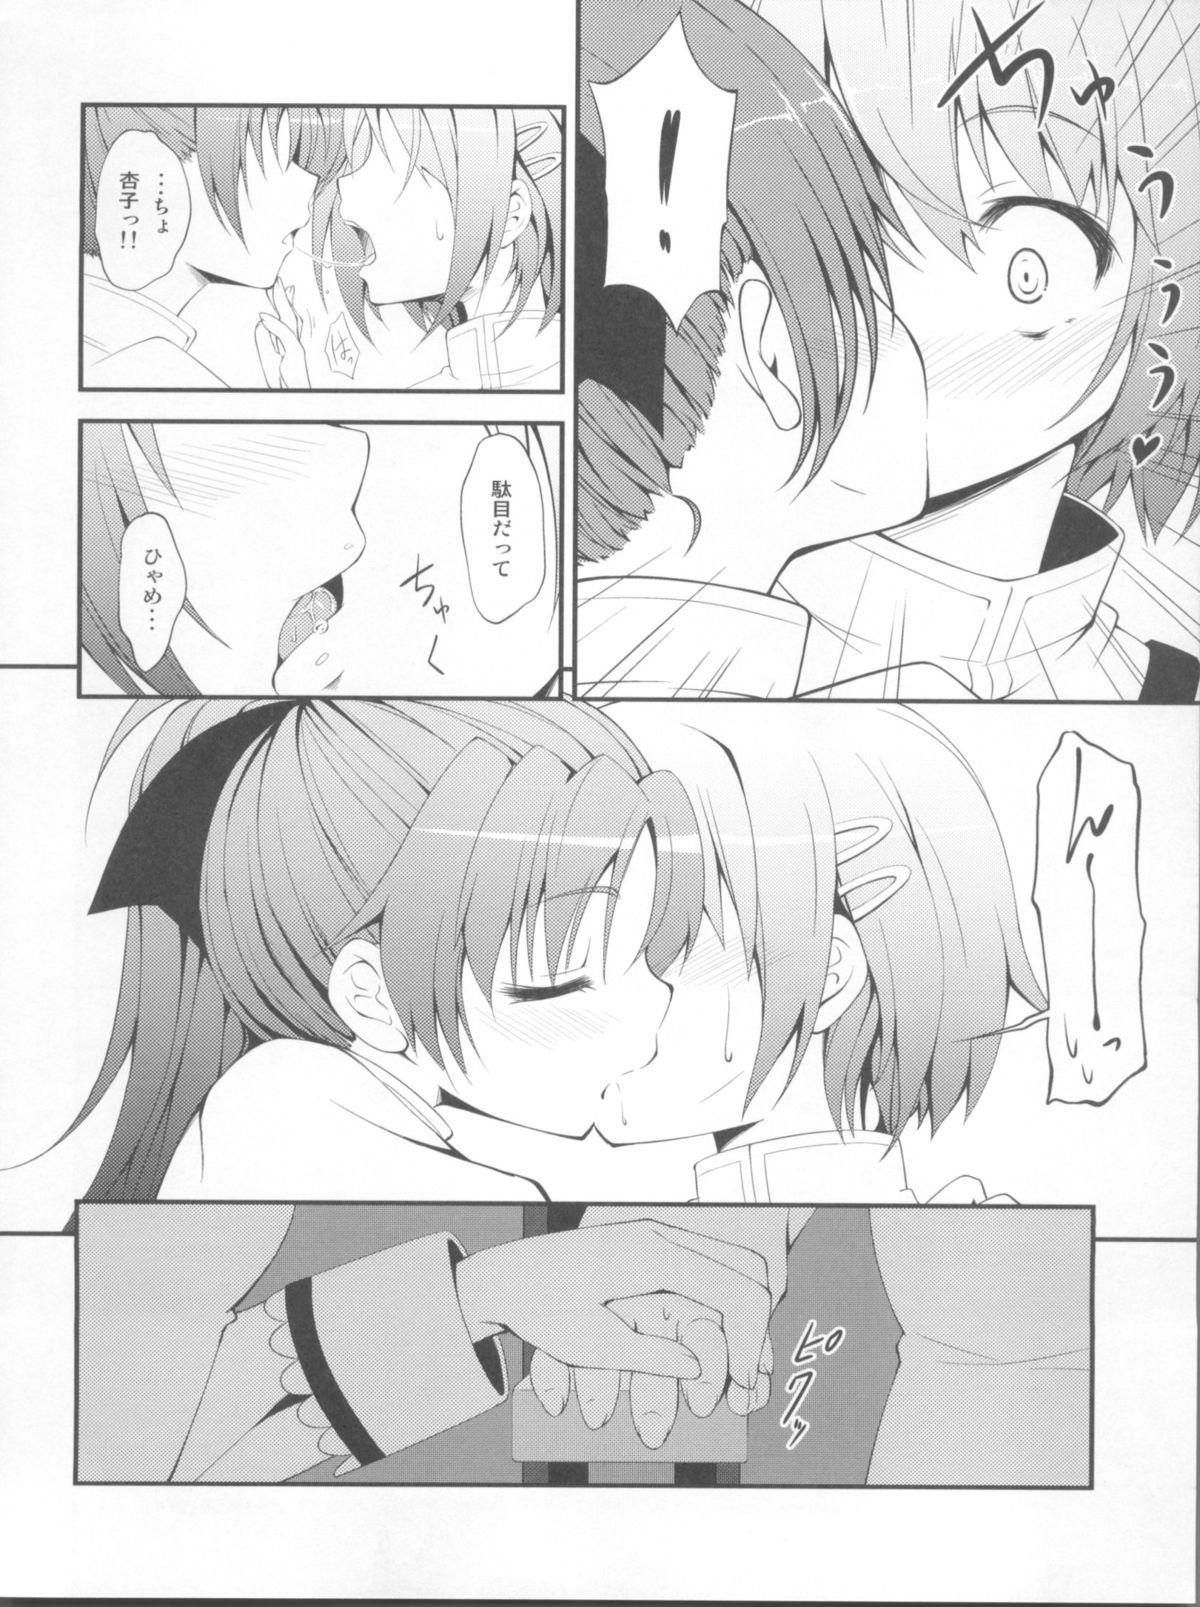 Farting Lovely Girls' Lily vol.2 - Puella magi madoka magica Sextoys - Page 7